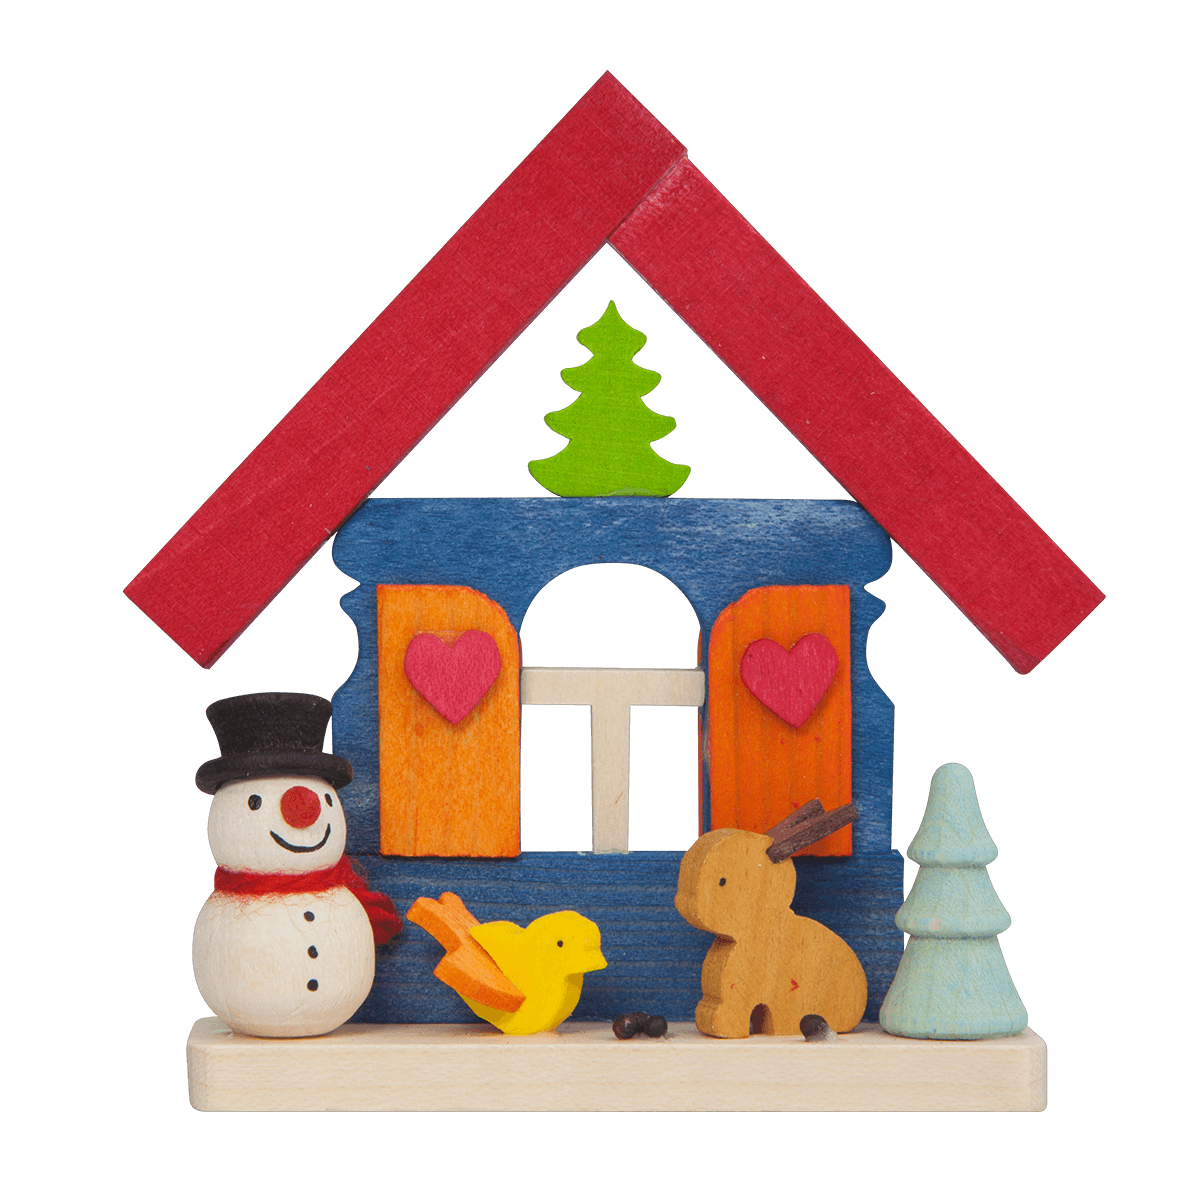 House 'Snowman' Ornament - WITH ANIMALS -